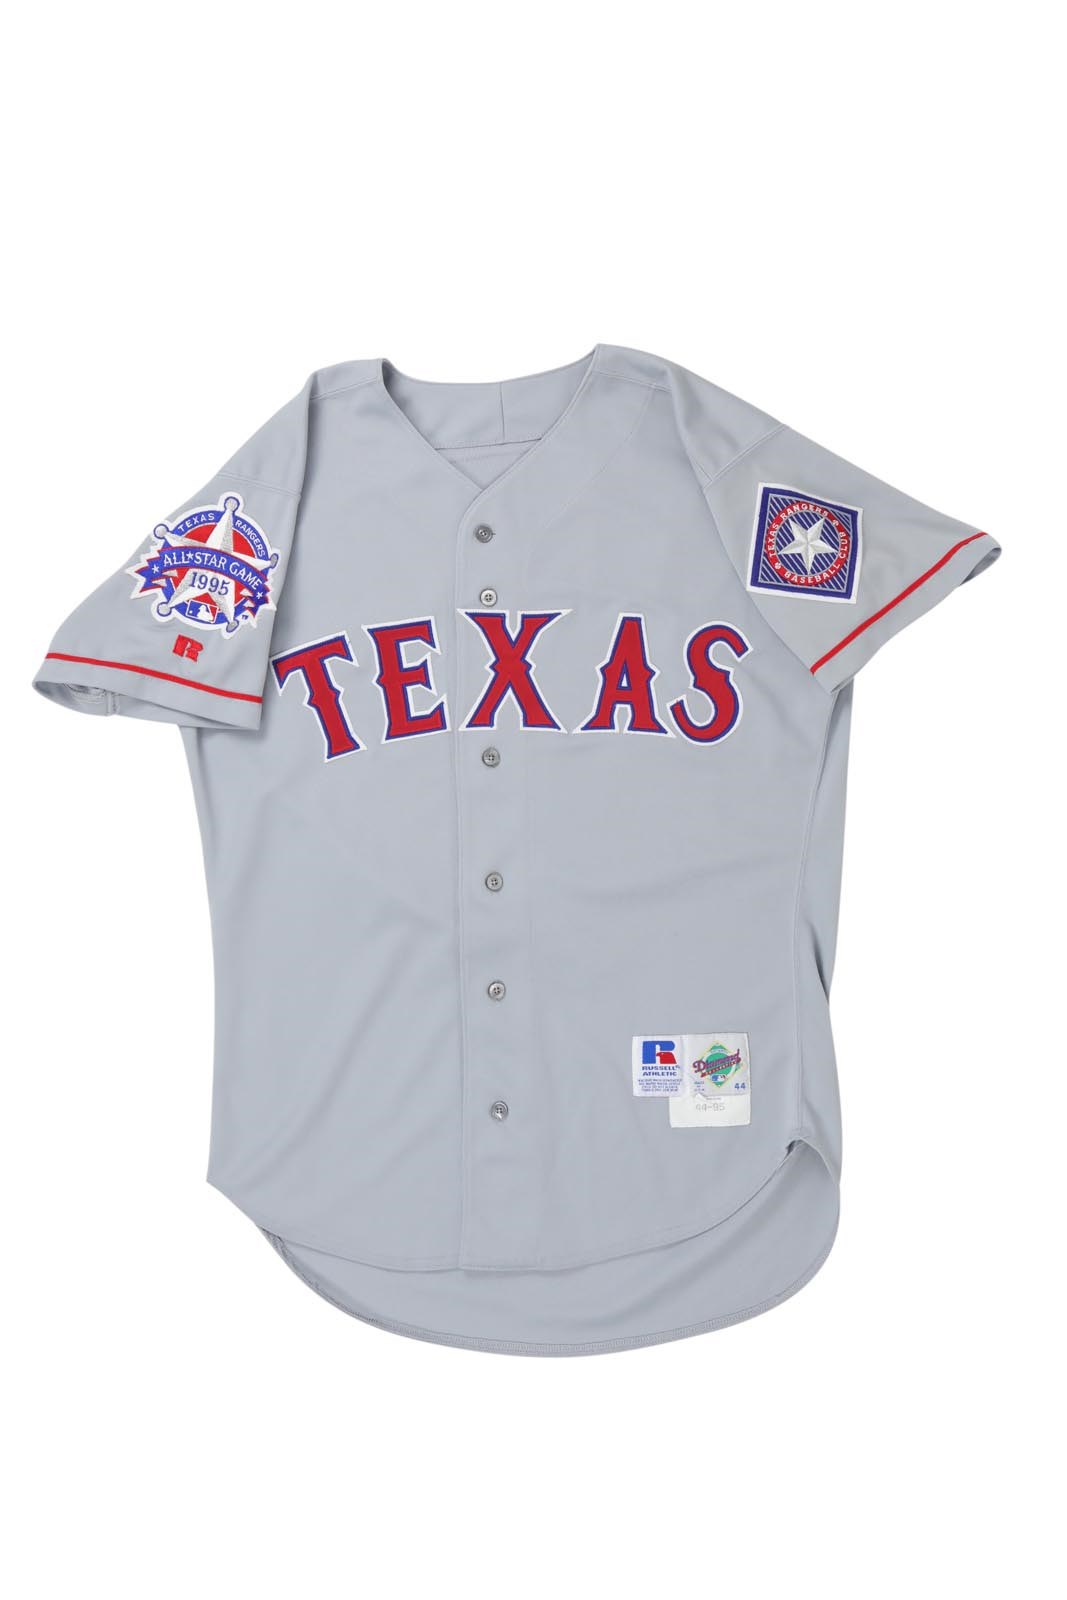 - 1995 Wilson Heredia Texas Rangers Game Worn Jersey - All Star Game Patch